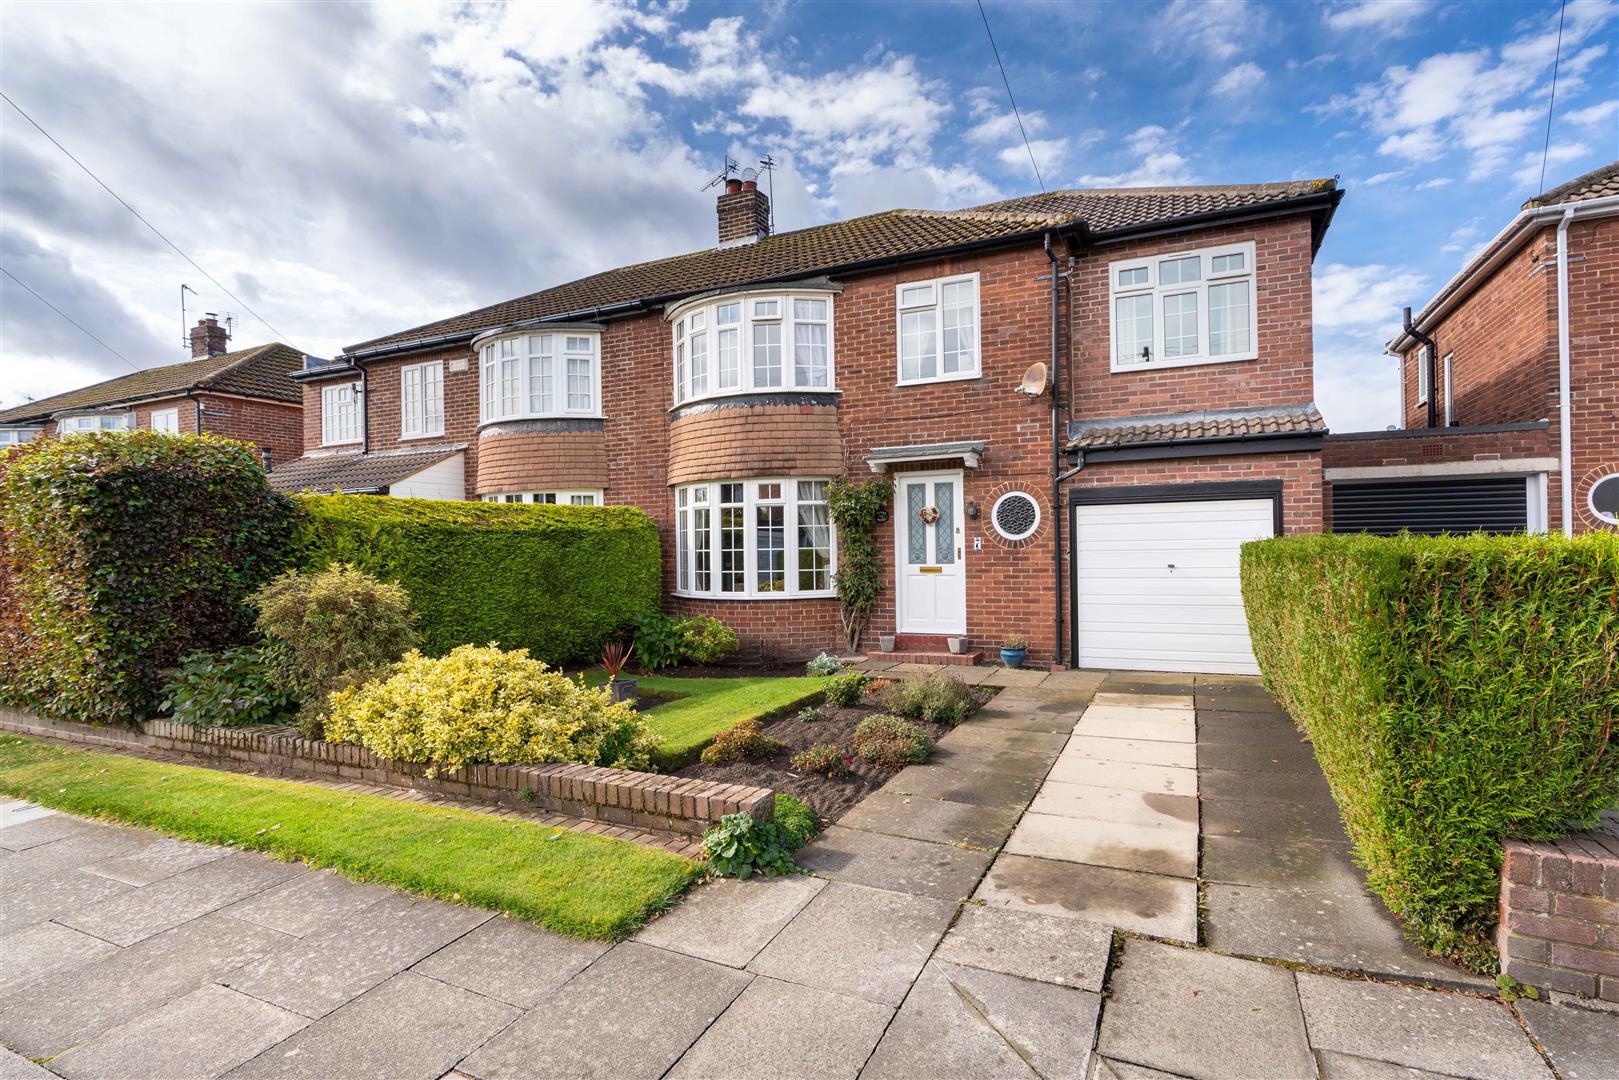 3 bed semi-detached house for sale in Beverley Close, Brunton Park  - Property Image 1